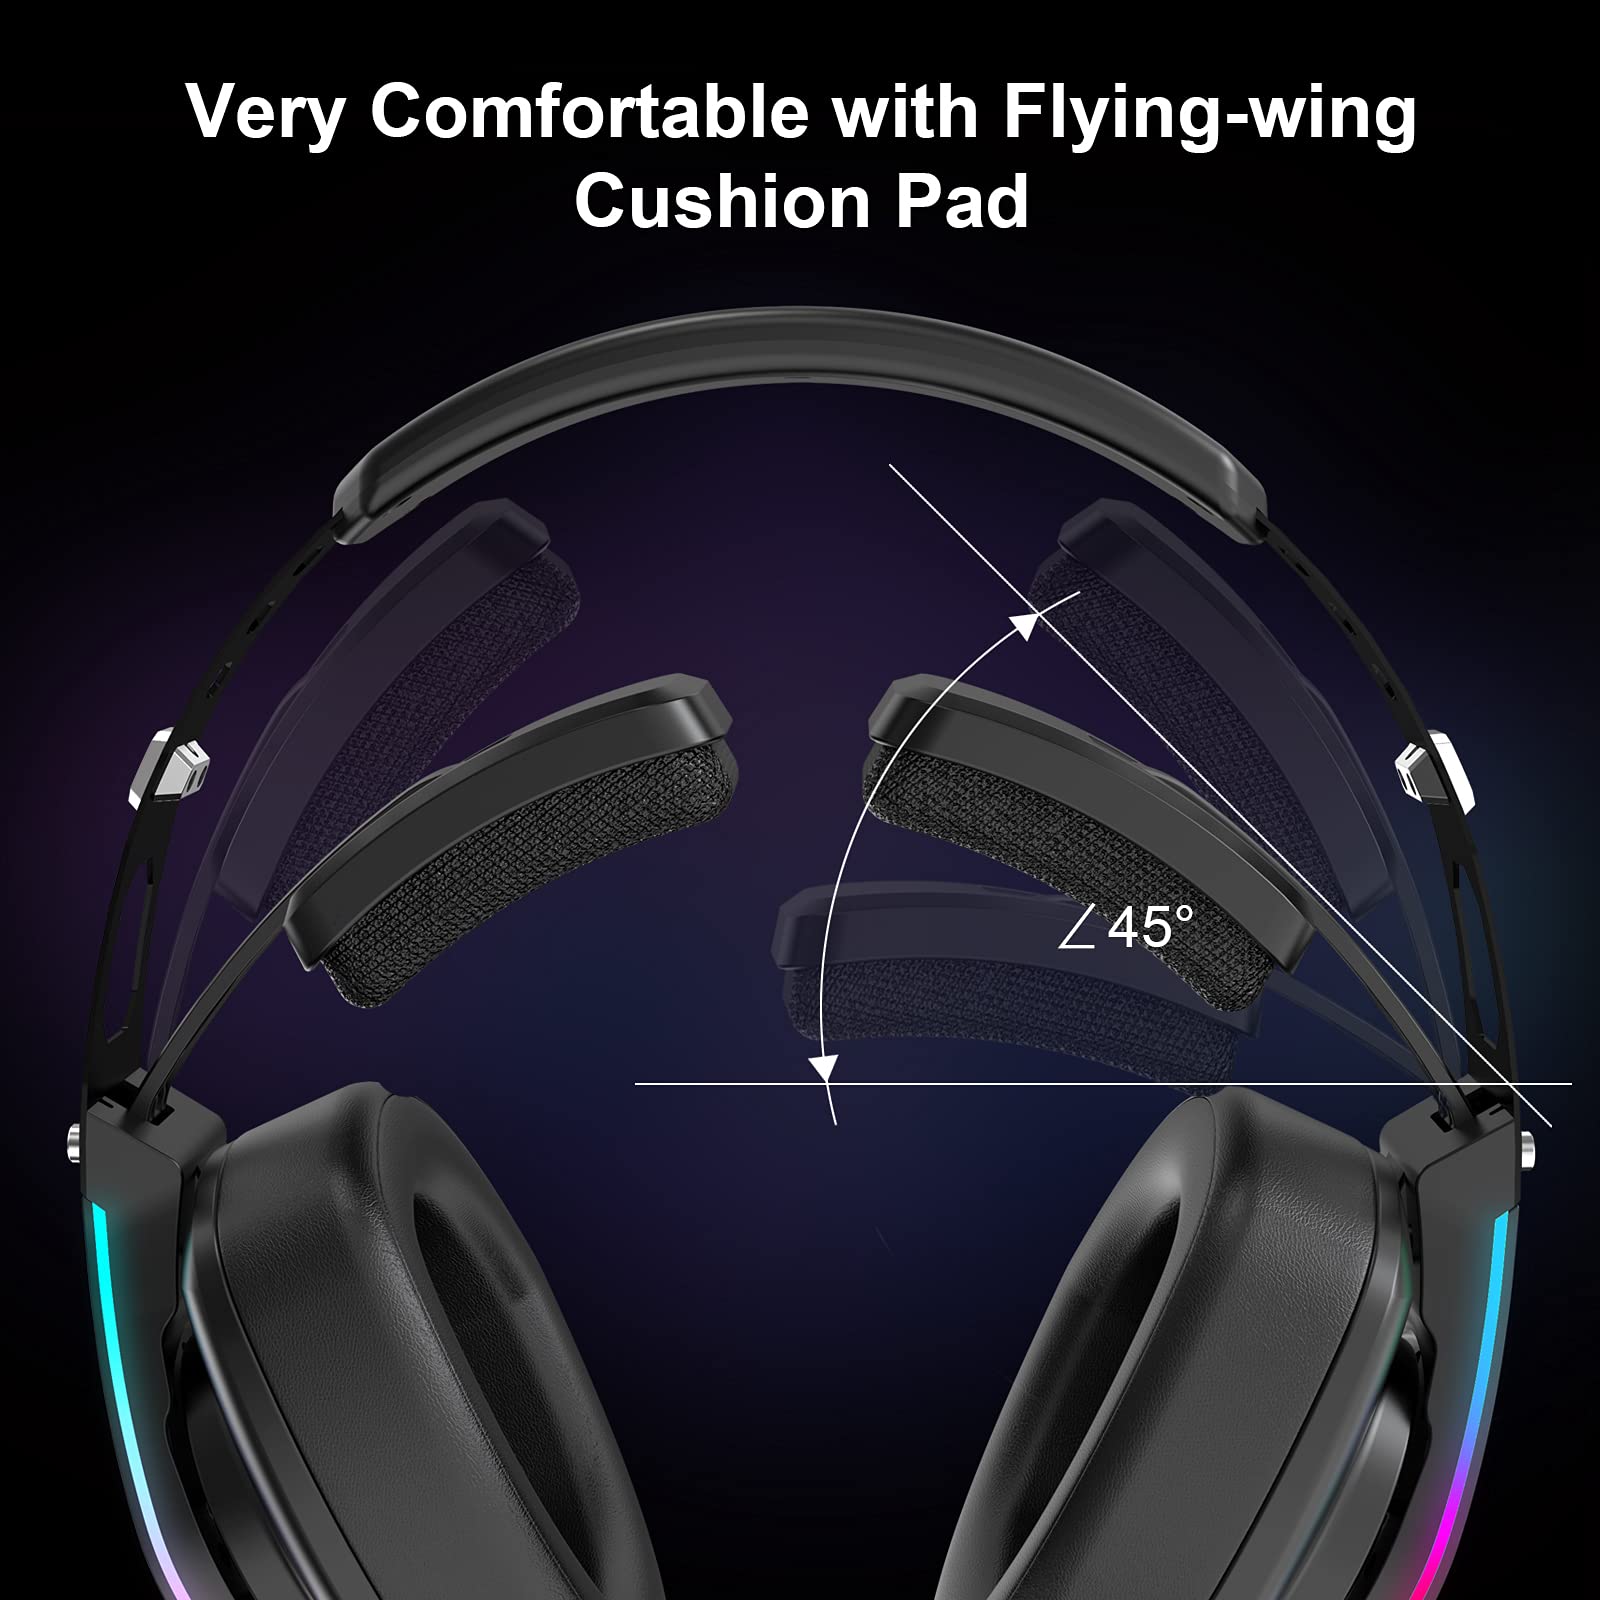 Jeecoo J65 USB Gaming Headset for PC - 7.1 Surround Sound Heavy Bass Headphones with Unique Cushion Pads, Clear and Crystal Microphone - Plug & Play for Laptop Computers